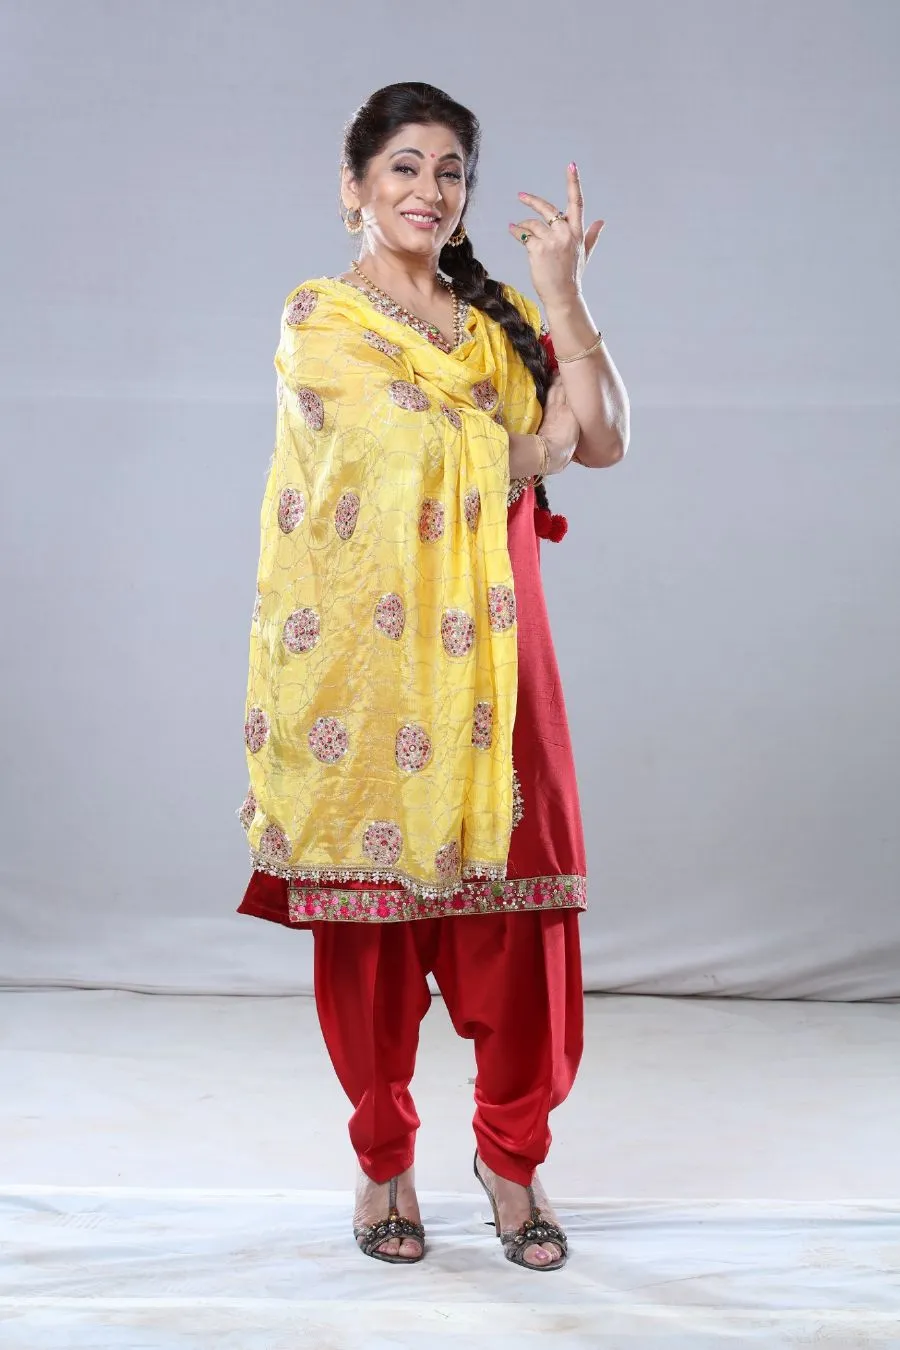 Archana Puransingh as Pammy in My Name Ijj Lakhan